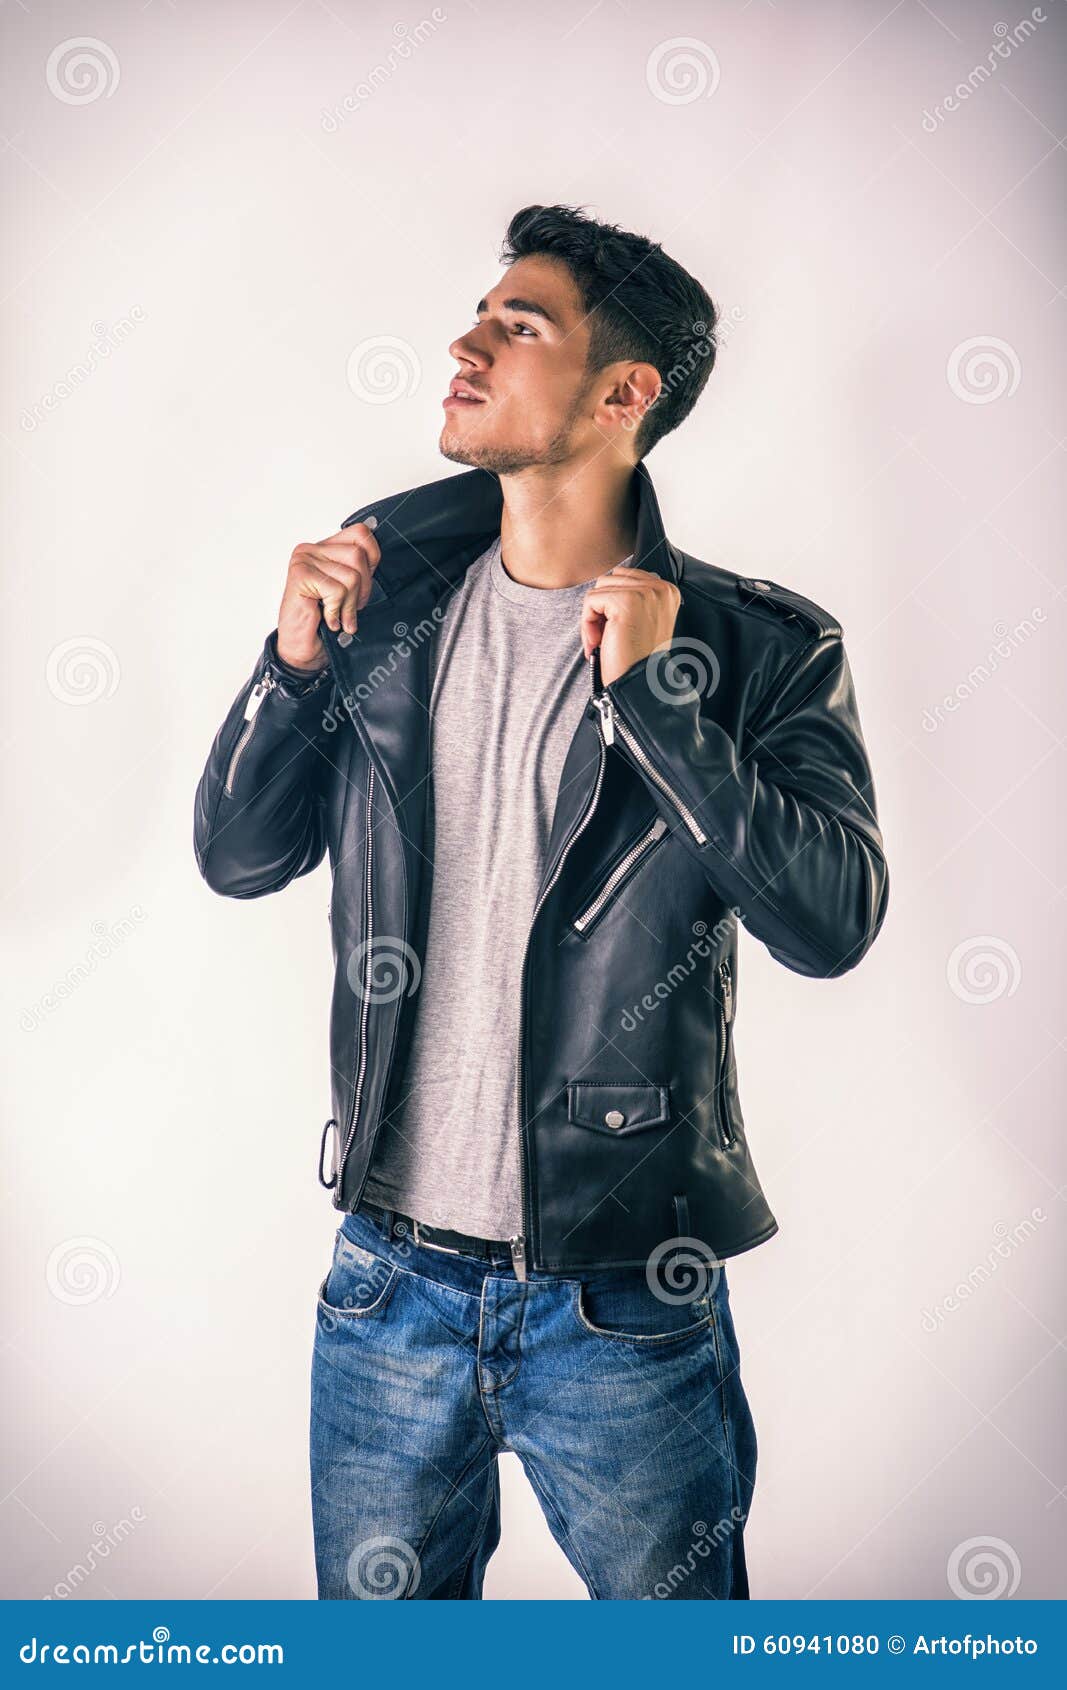 Handsome Young Man Wearing Leather Jacket, T-shirt Stock Photo ...